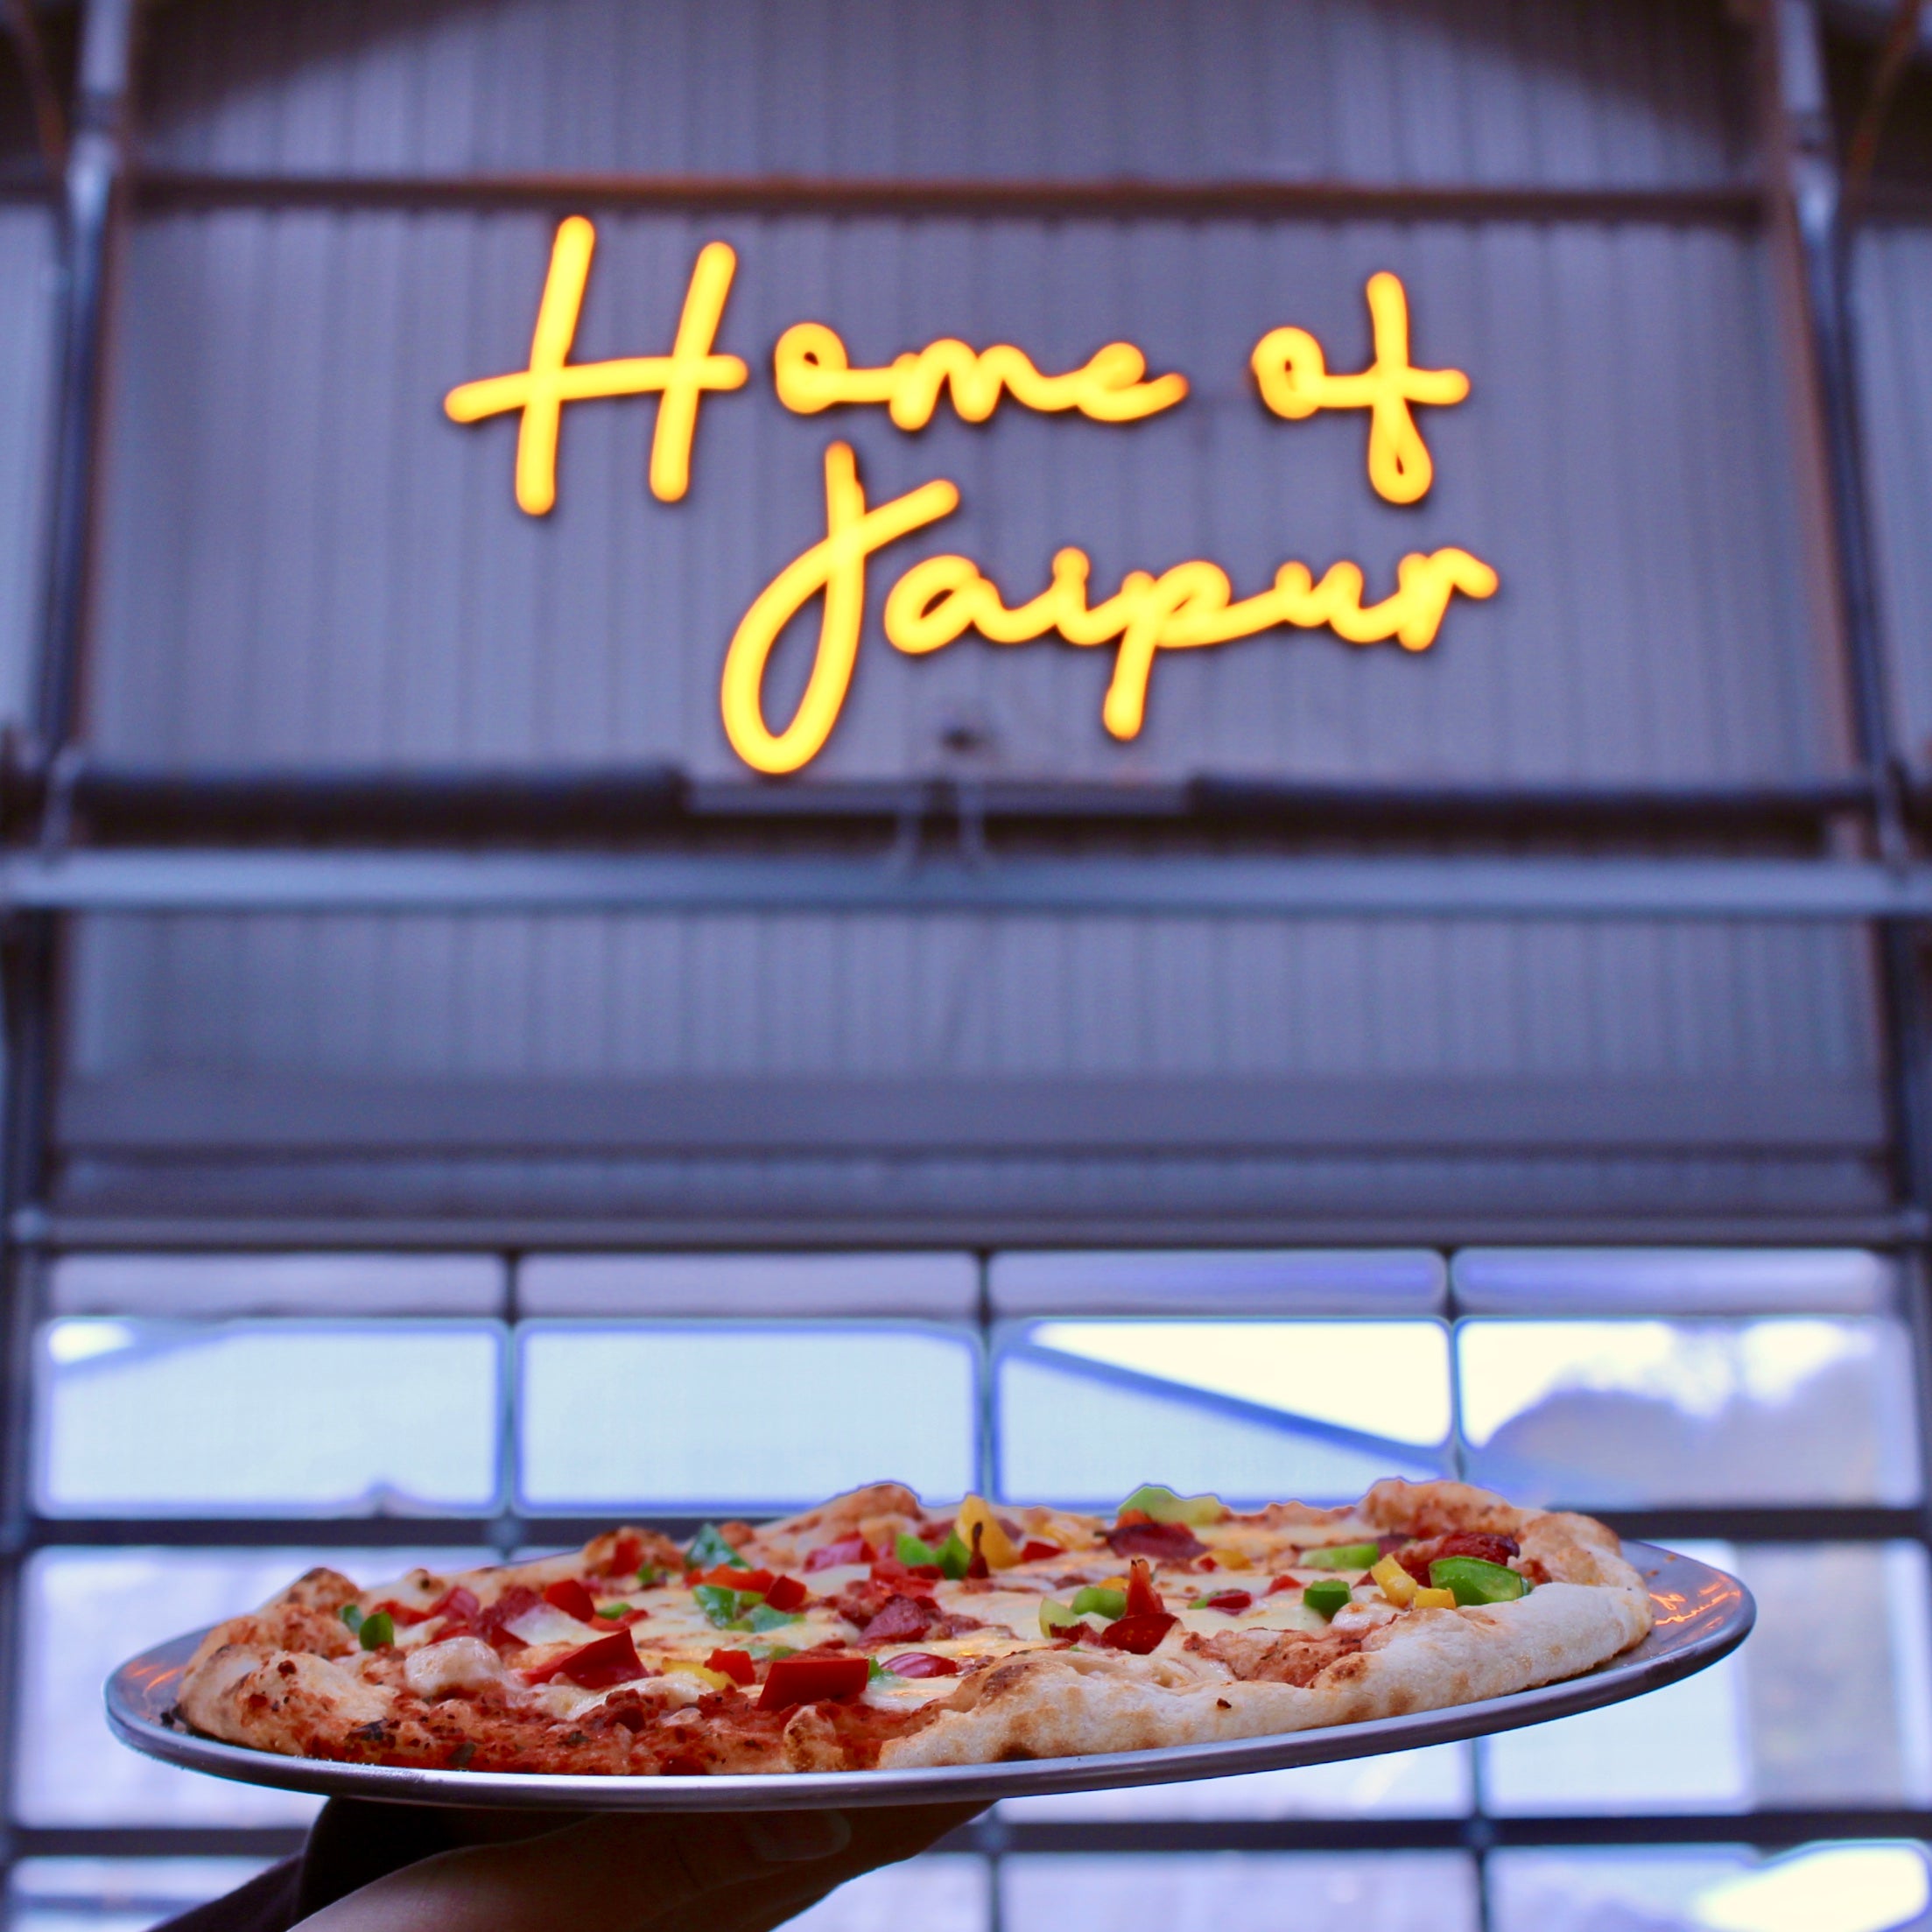 Inside the taproom with pizza and the home of jaipur neon sign